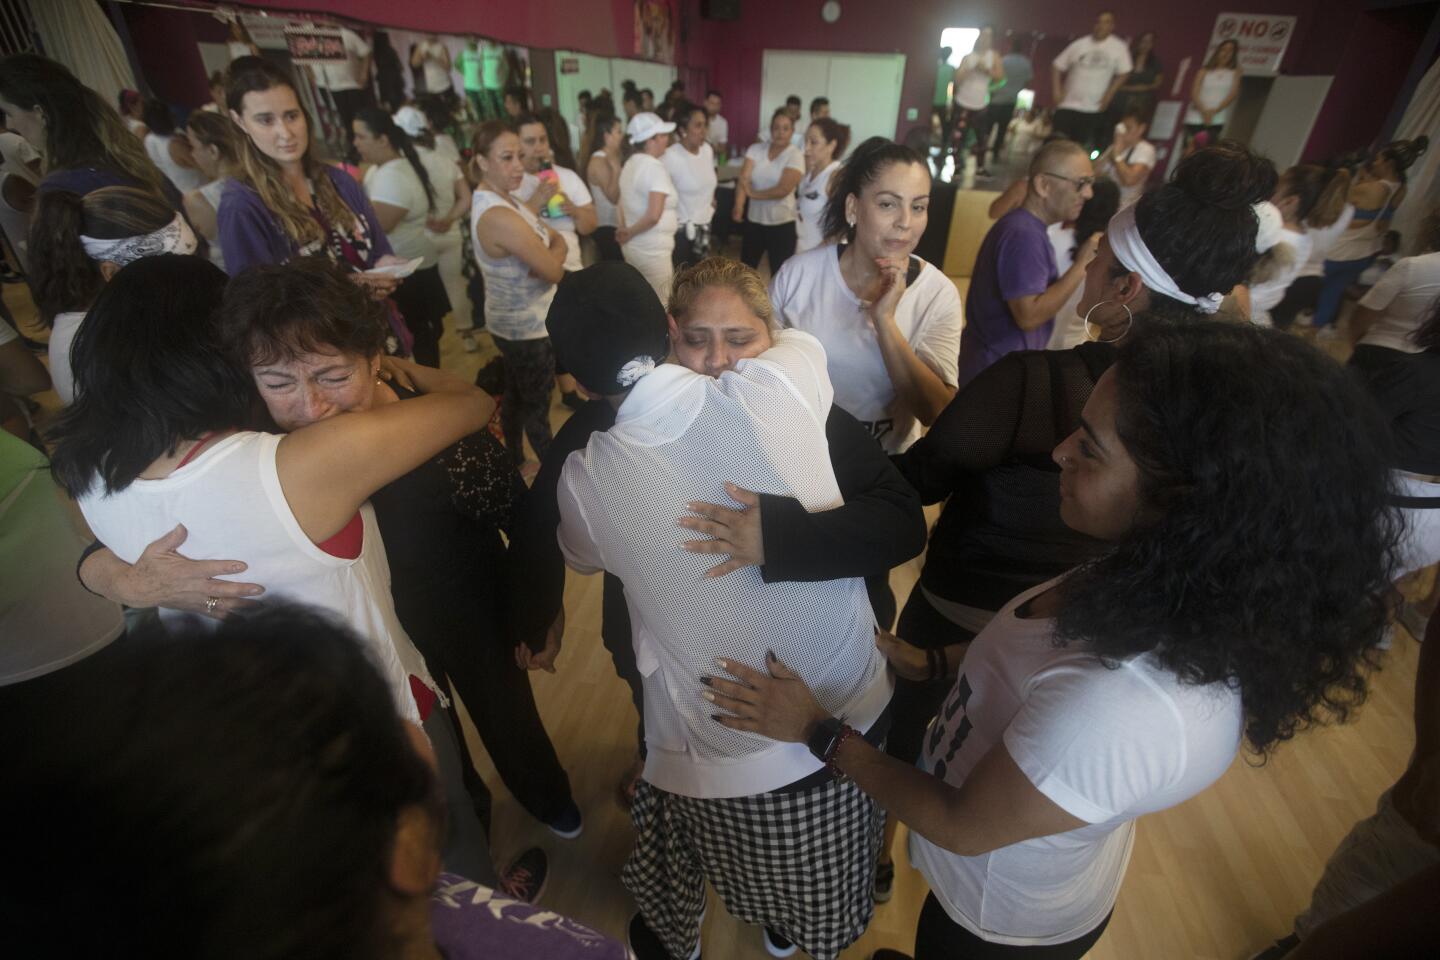 People surround and hug Keyla’s mother, Lorena Pimentel de Salazar, middle, at a Zumba class fundraiser at Dancing Angel’z Blvd in San Jose.